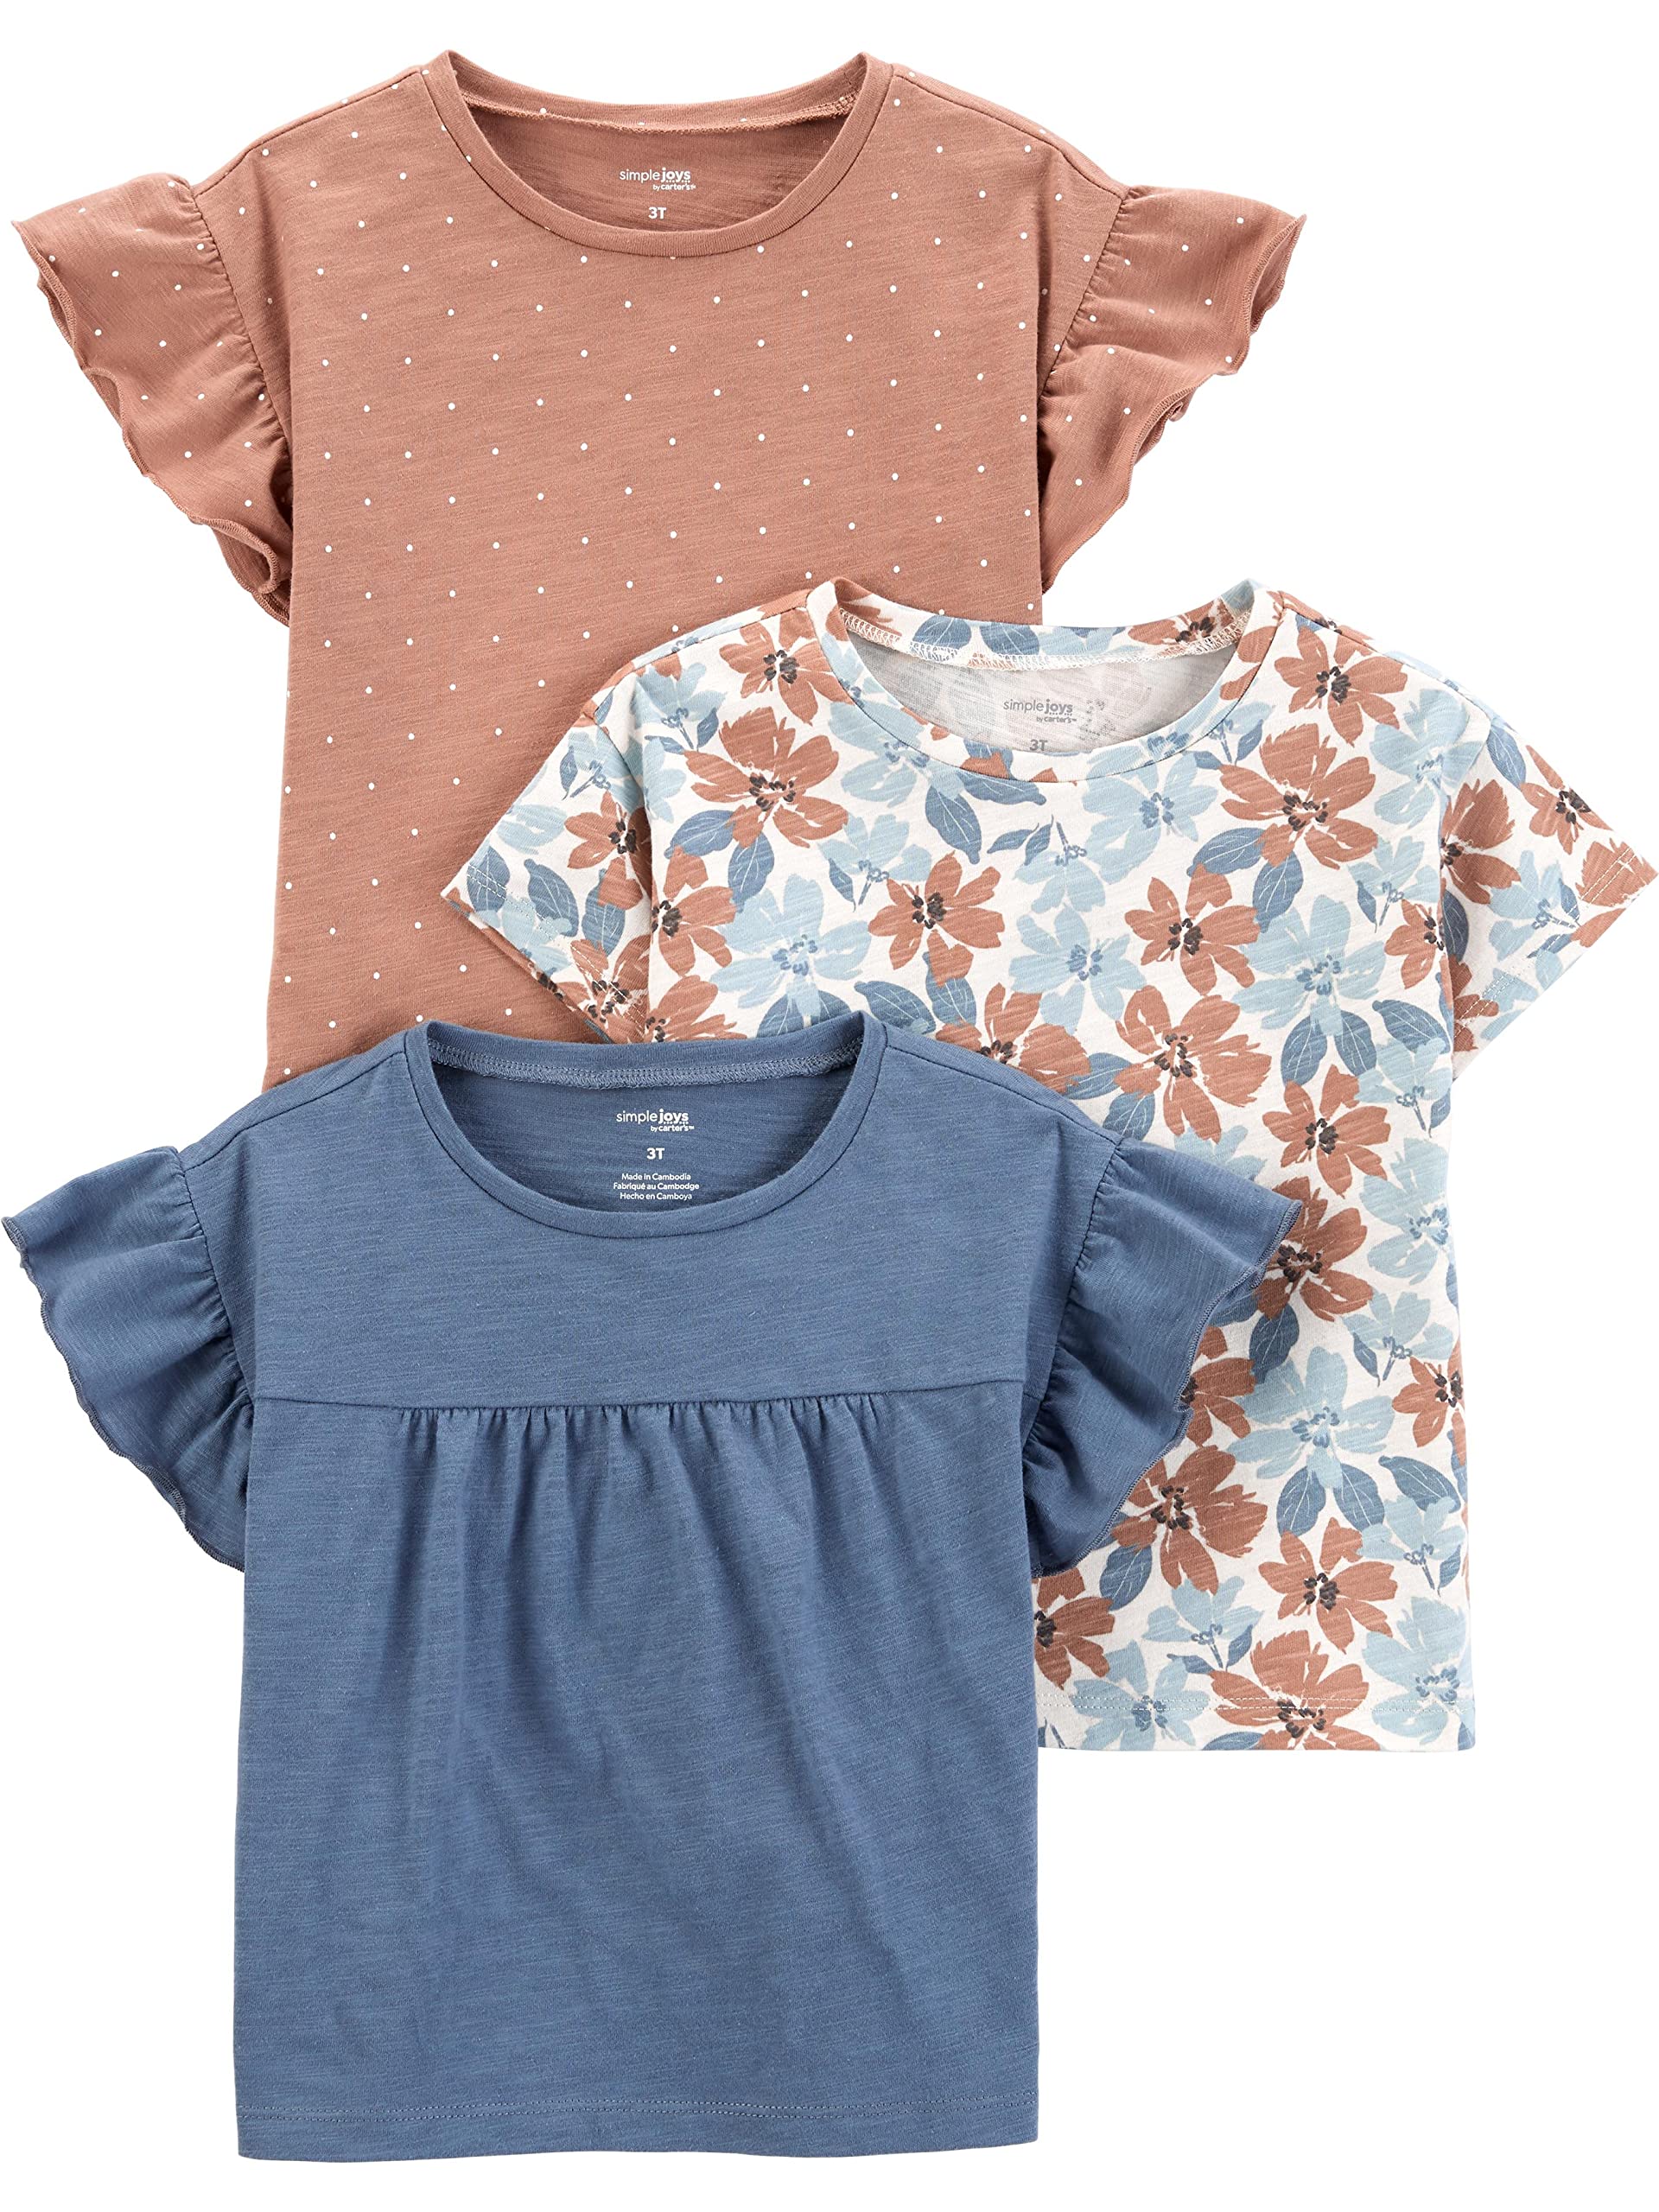 Simple Joys by Carter's Toddler Girls' Short-Sleeve Shirts, Pack of 3, Brown Dots/Denim/White Floral, 4T